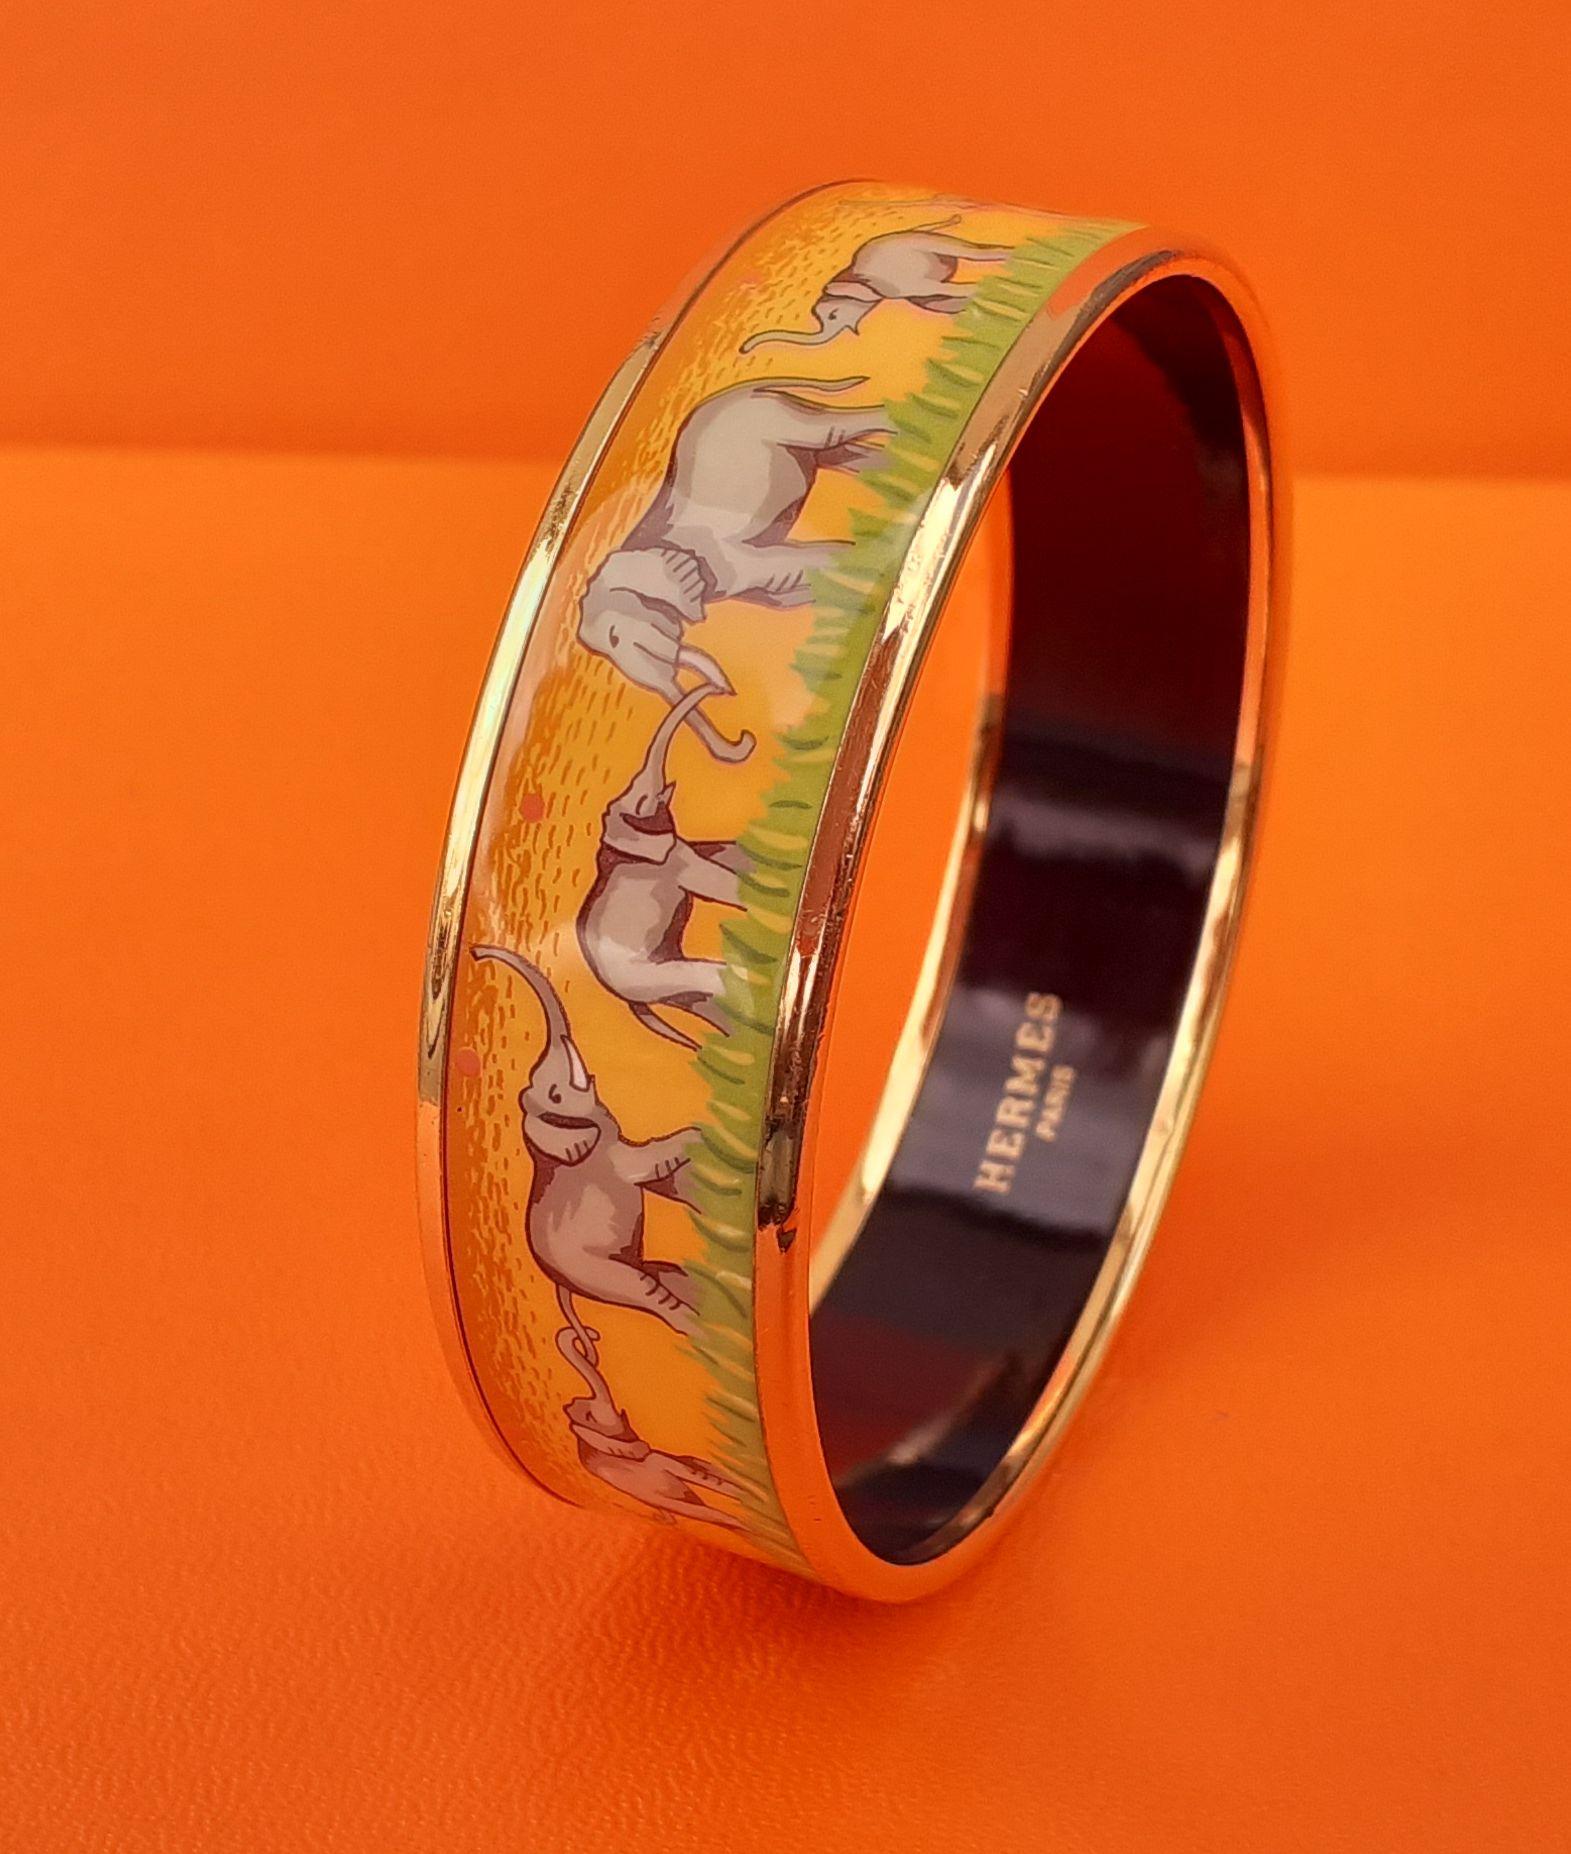 Gorgeous Authentic Hermès Bracelet

A grail ! Hard to find

Pattern: Elephants Grazing

Made in Austria + F

Made of printed Enamel and Gold Plated Hardware

Colorways: Yellow background with discreet Pink peas, Grey elephants and Green grass,